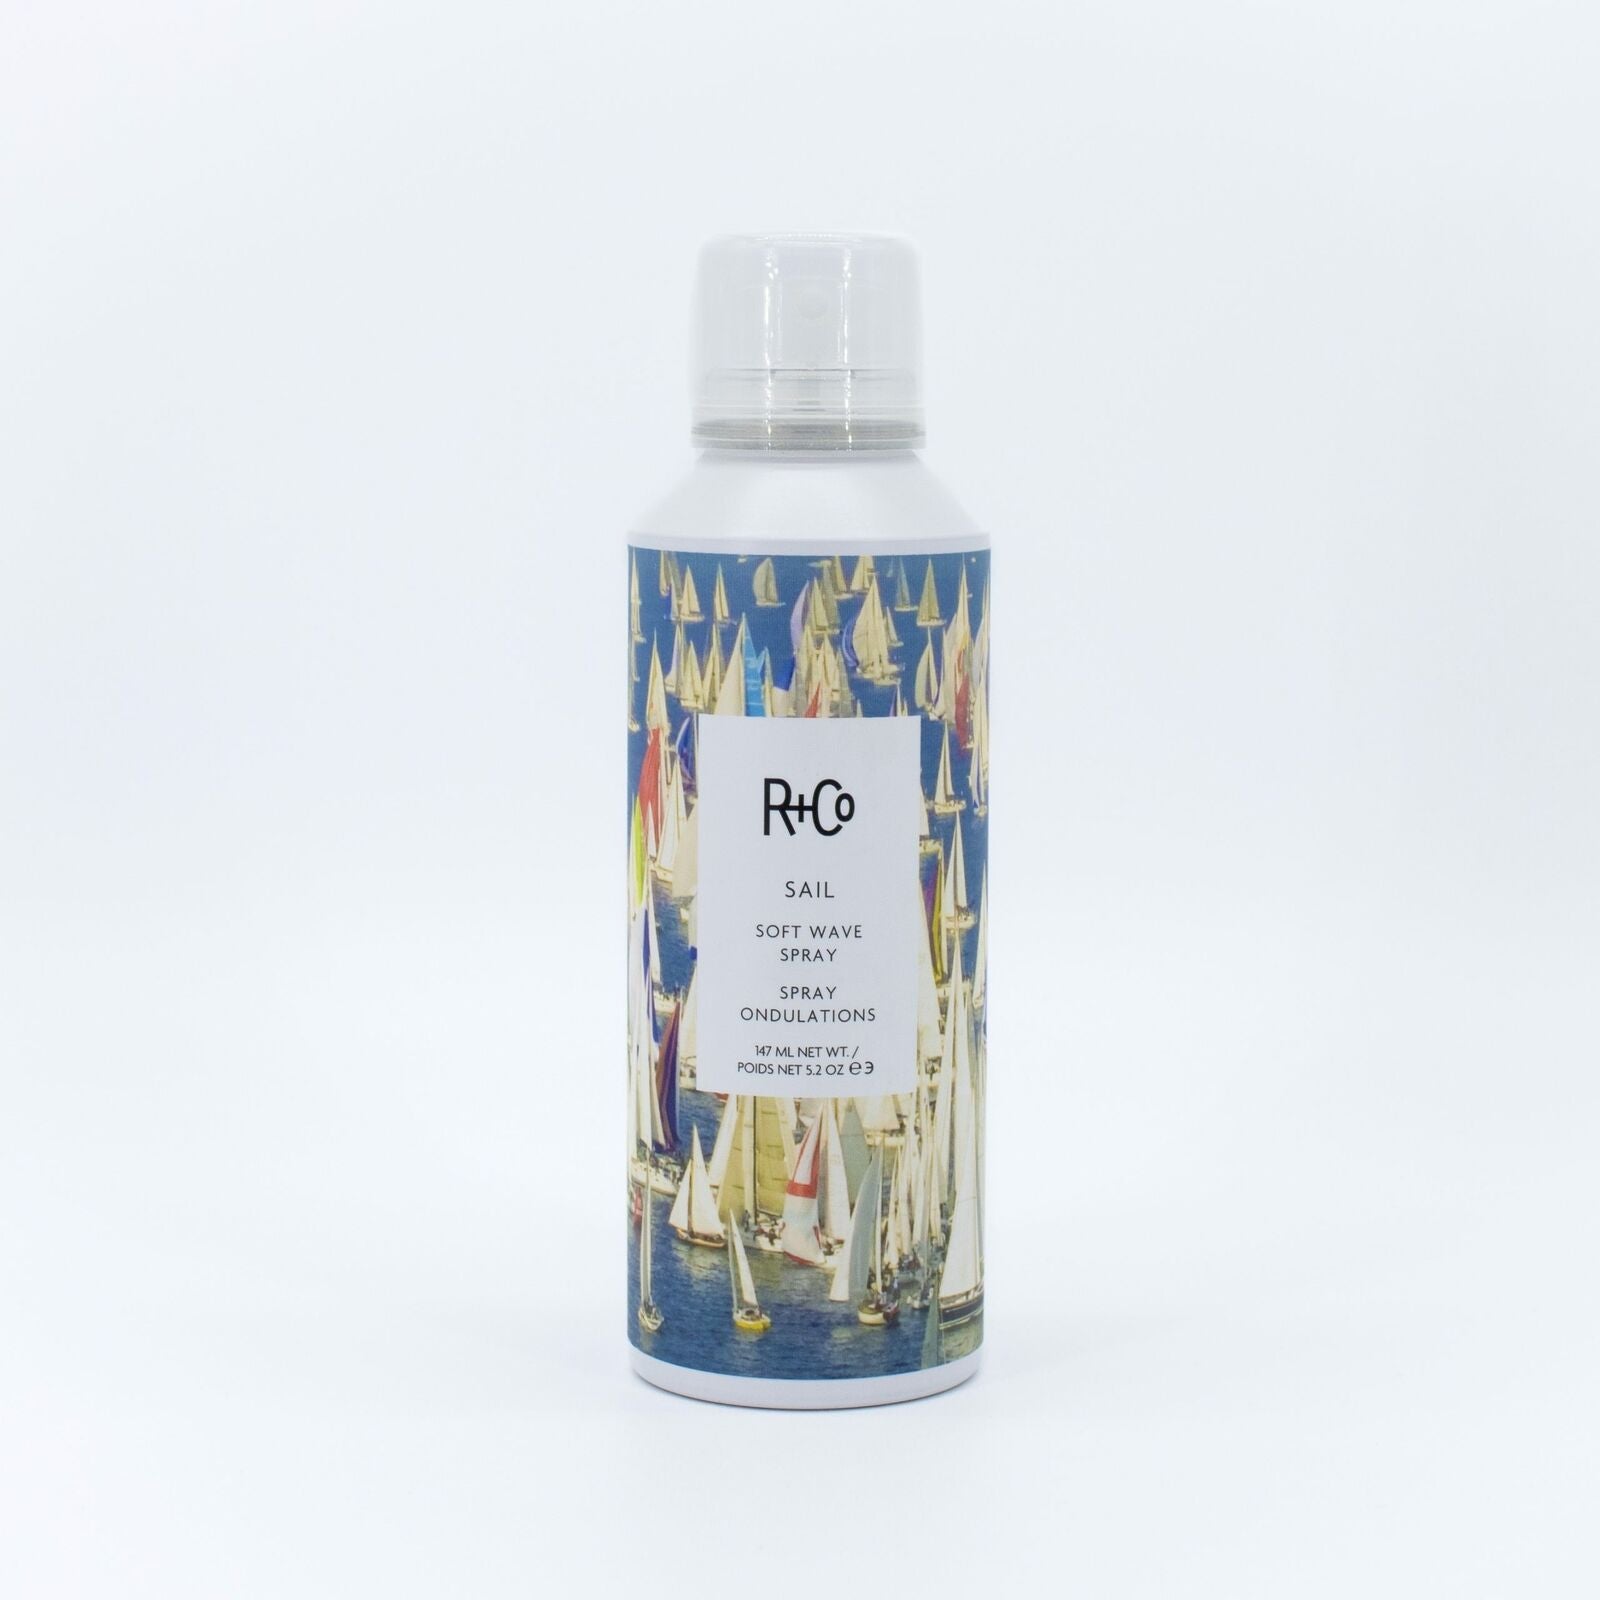 R+Co Sail Soft Wave Spray 5.2oz - Small Amount Missing